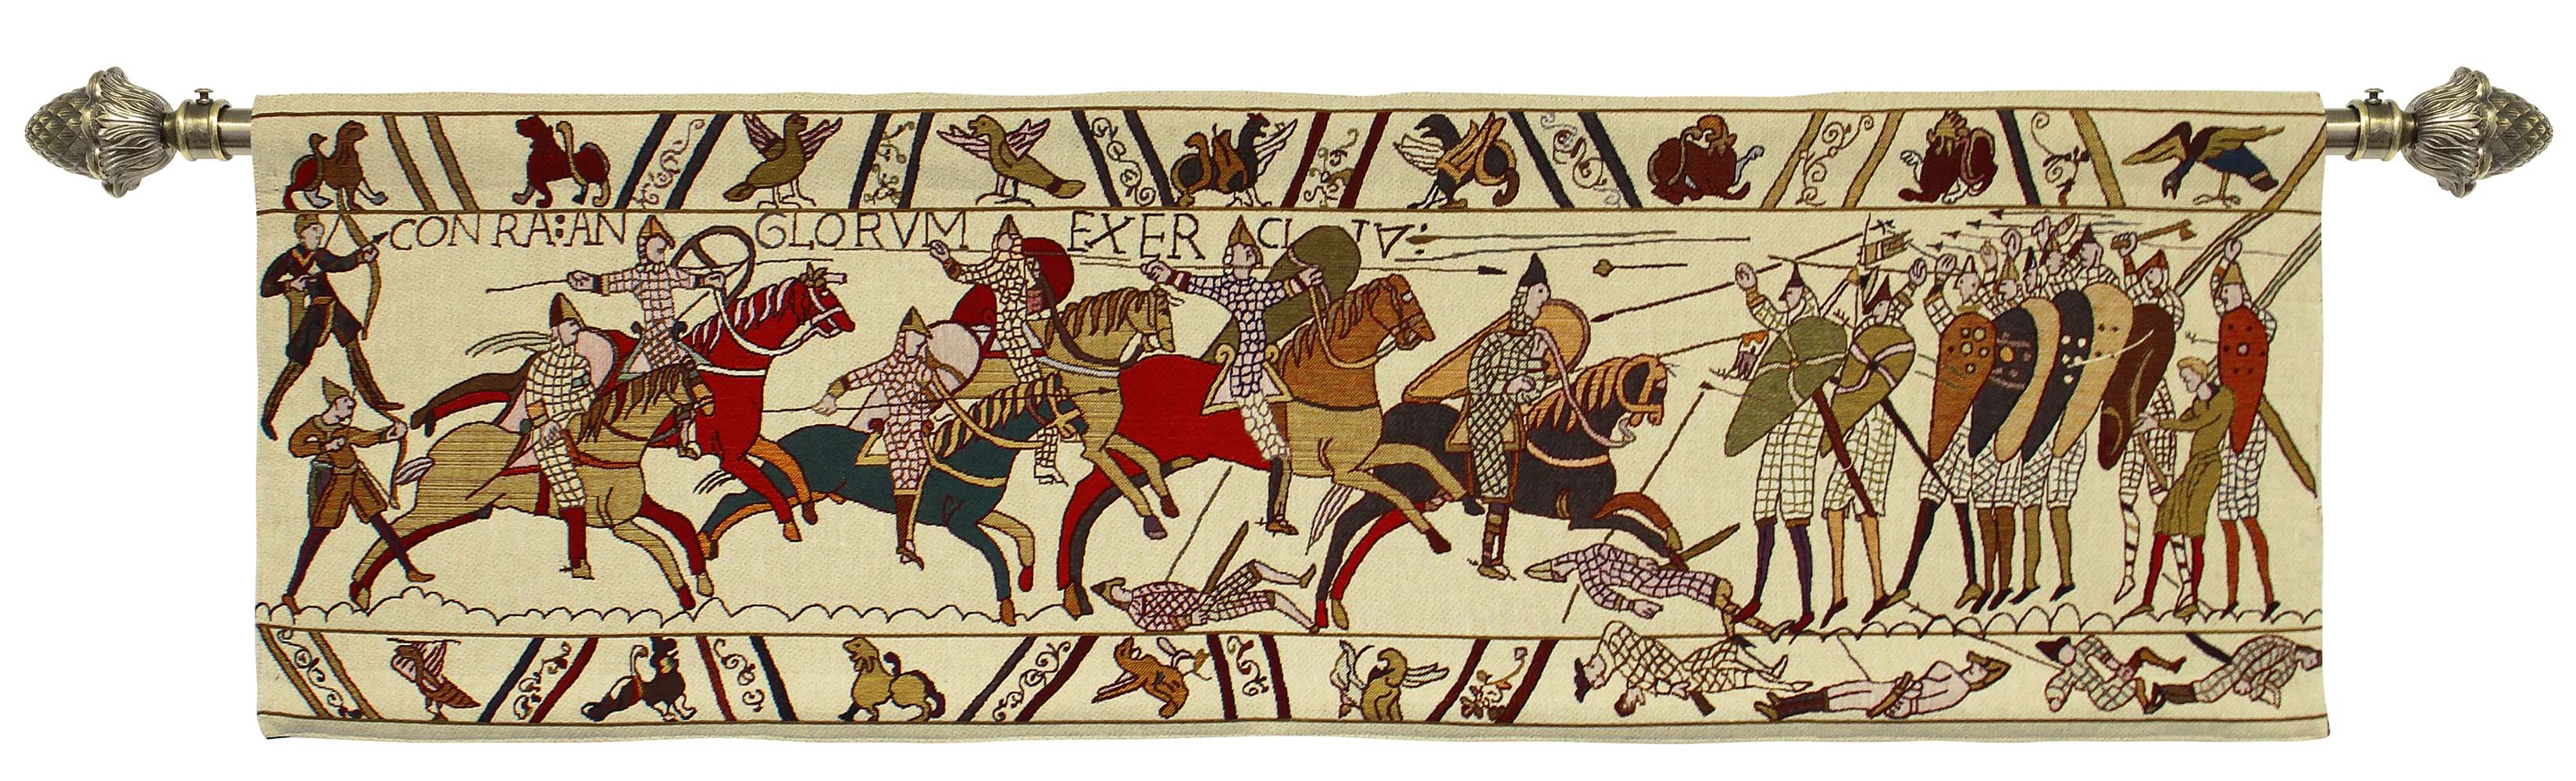 Wall Tapestry-Bayeux Hastings Battle Signare Tapestry